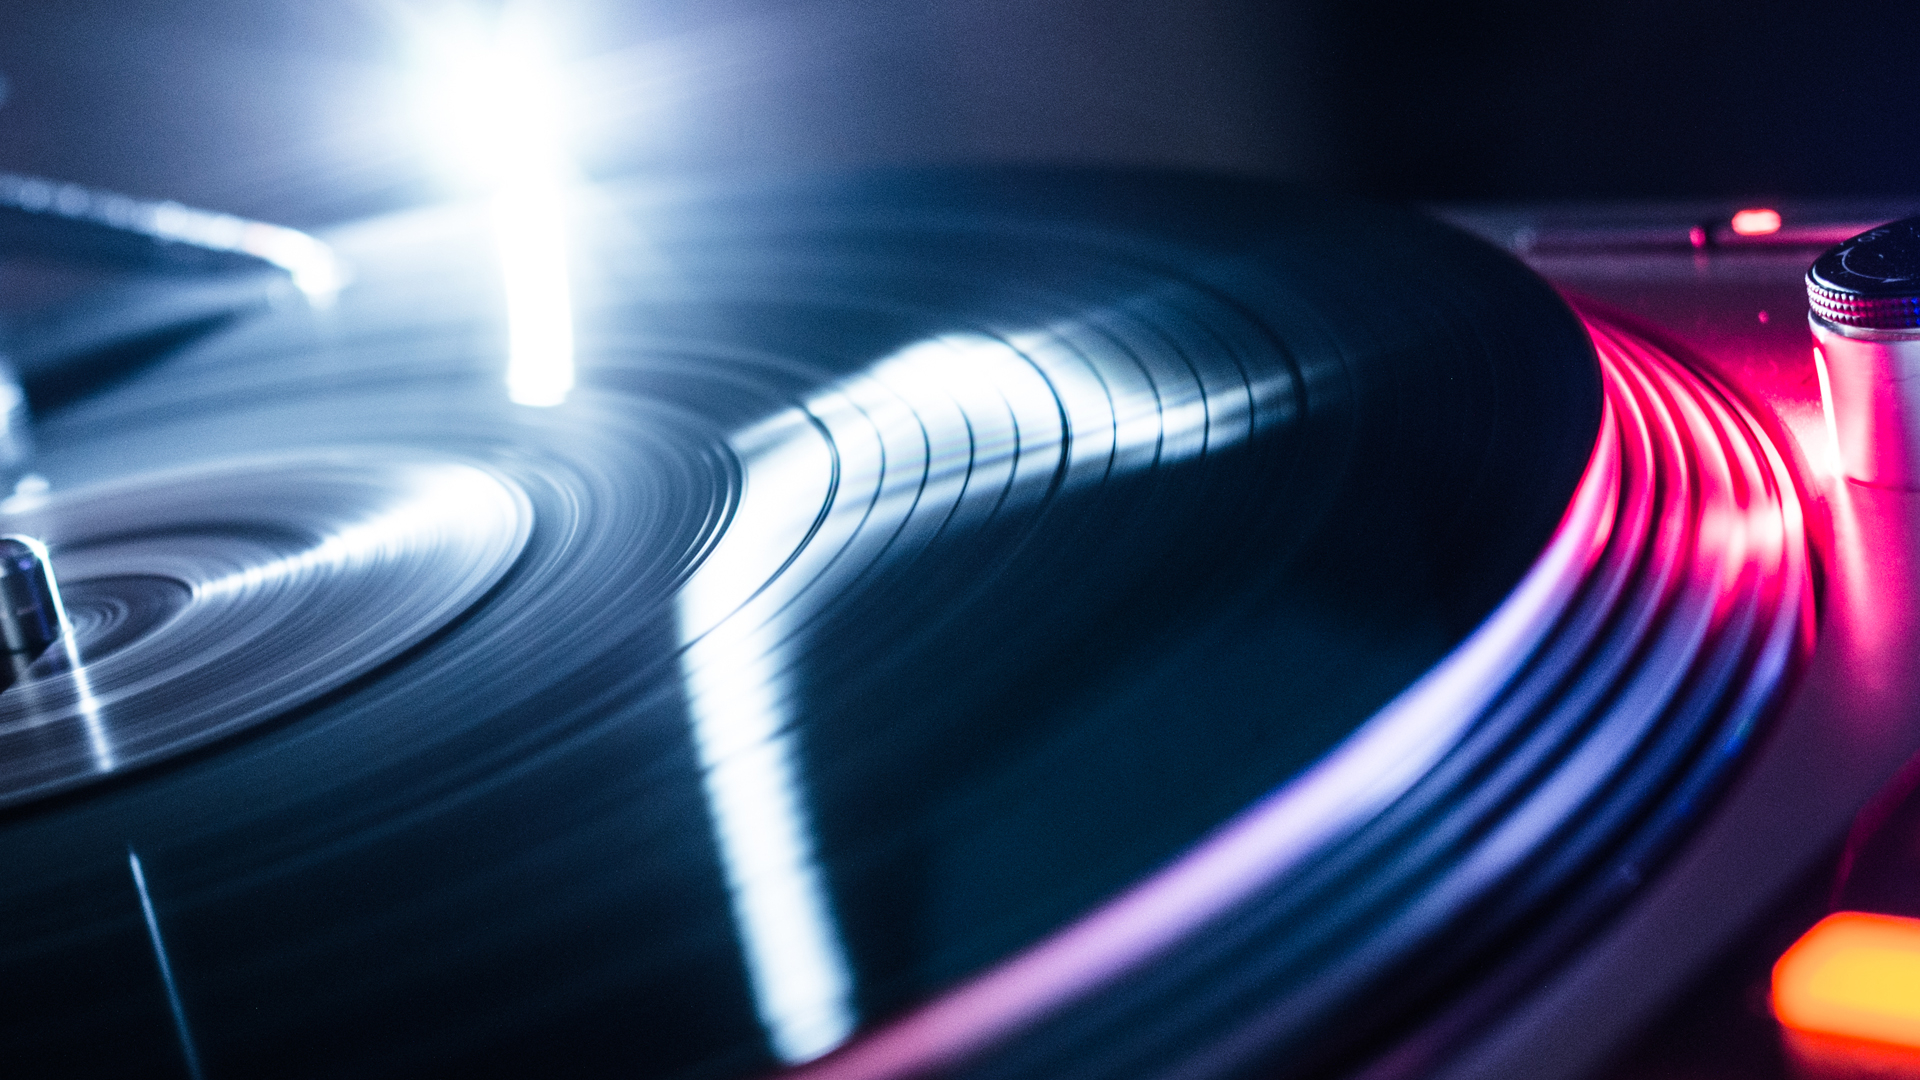 1920x1080 Technics SL-1200GR review: the DJ turntable with appeal way beyond the dancefloor | T3